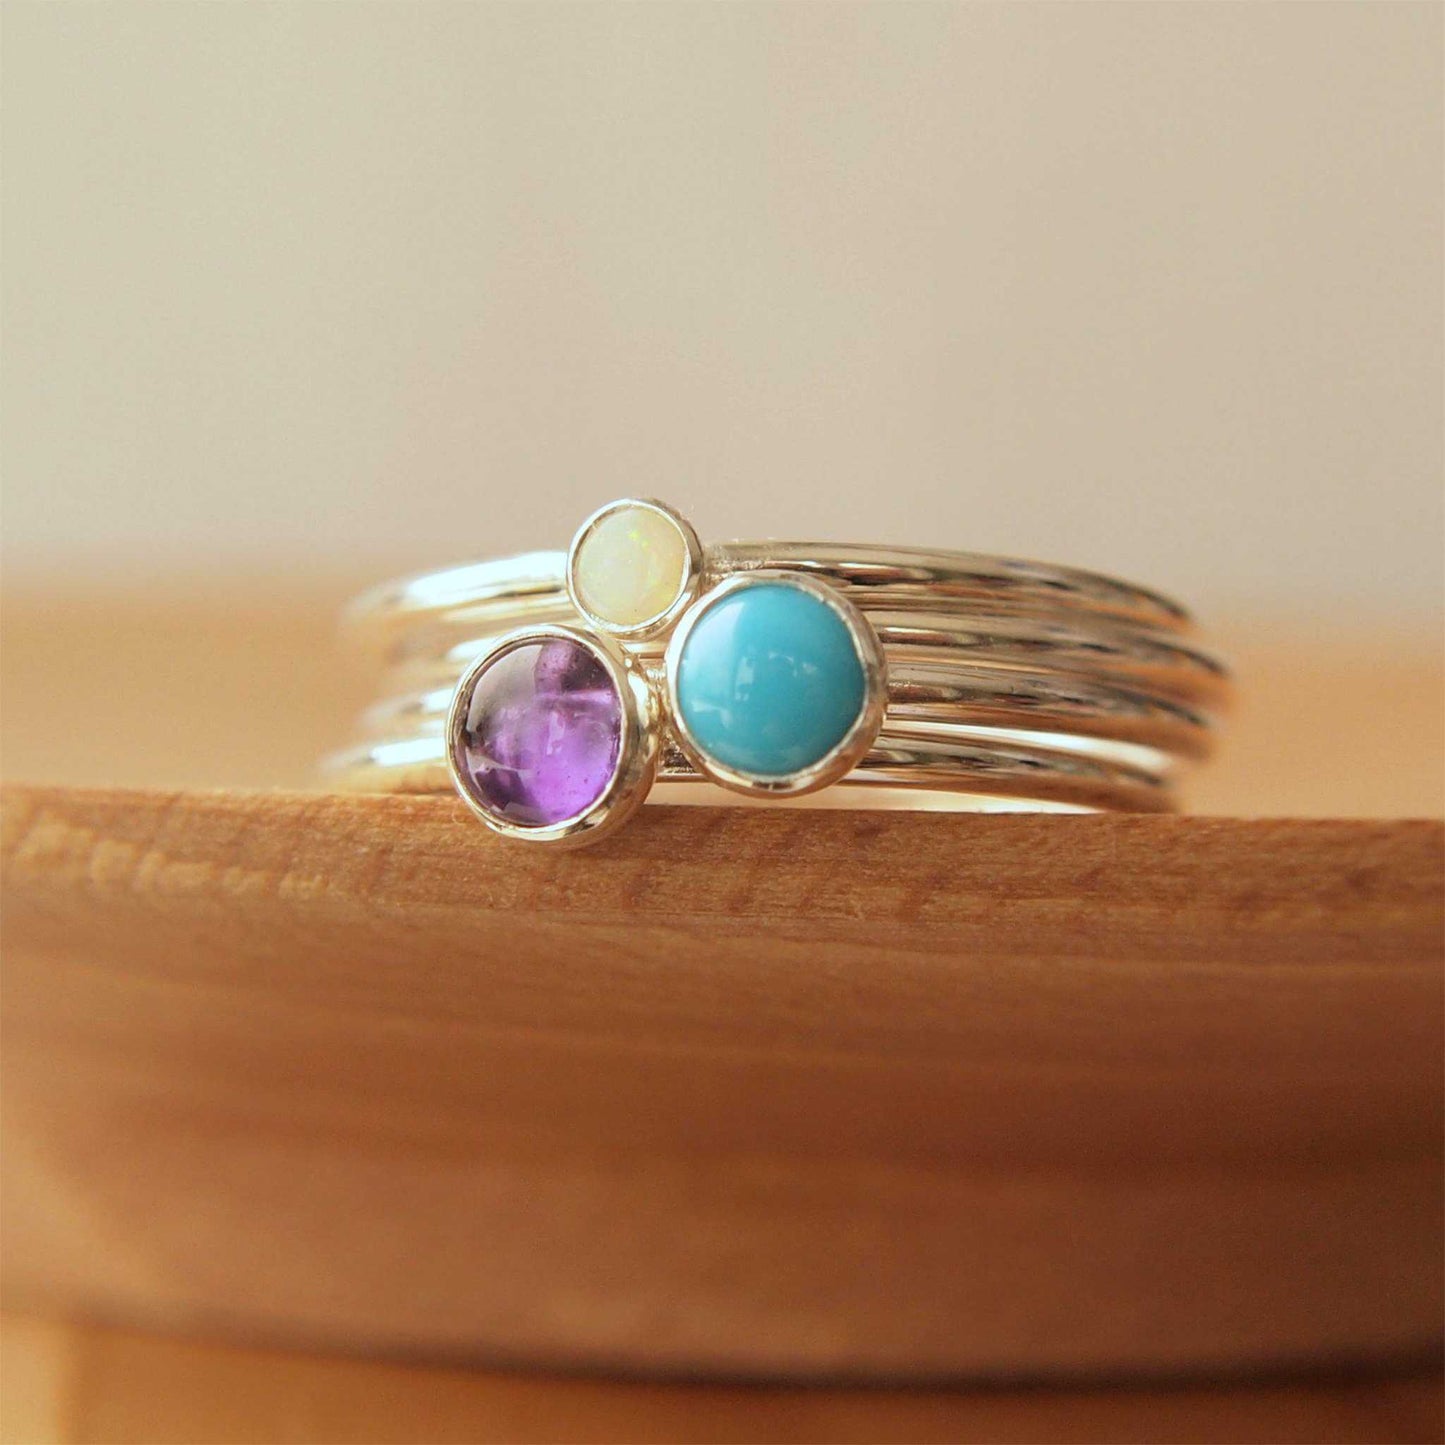 Family Birthstone Ring set with Amethyst, Turquoise and Opal in Sterling Silver. Handmade in Scotland by maram jewellery